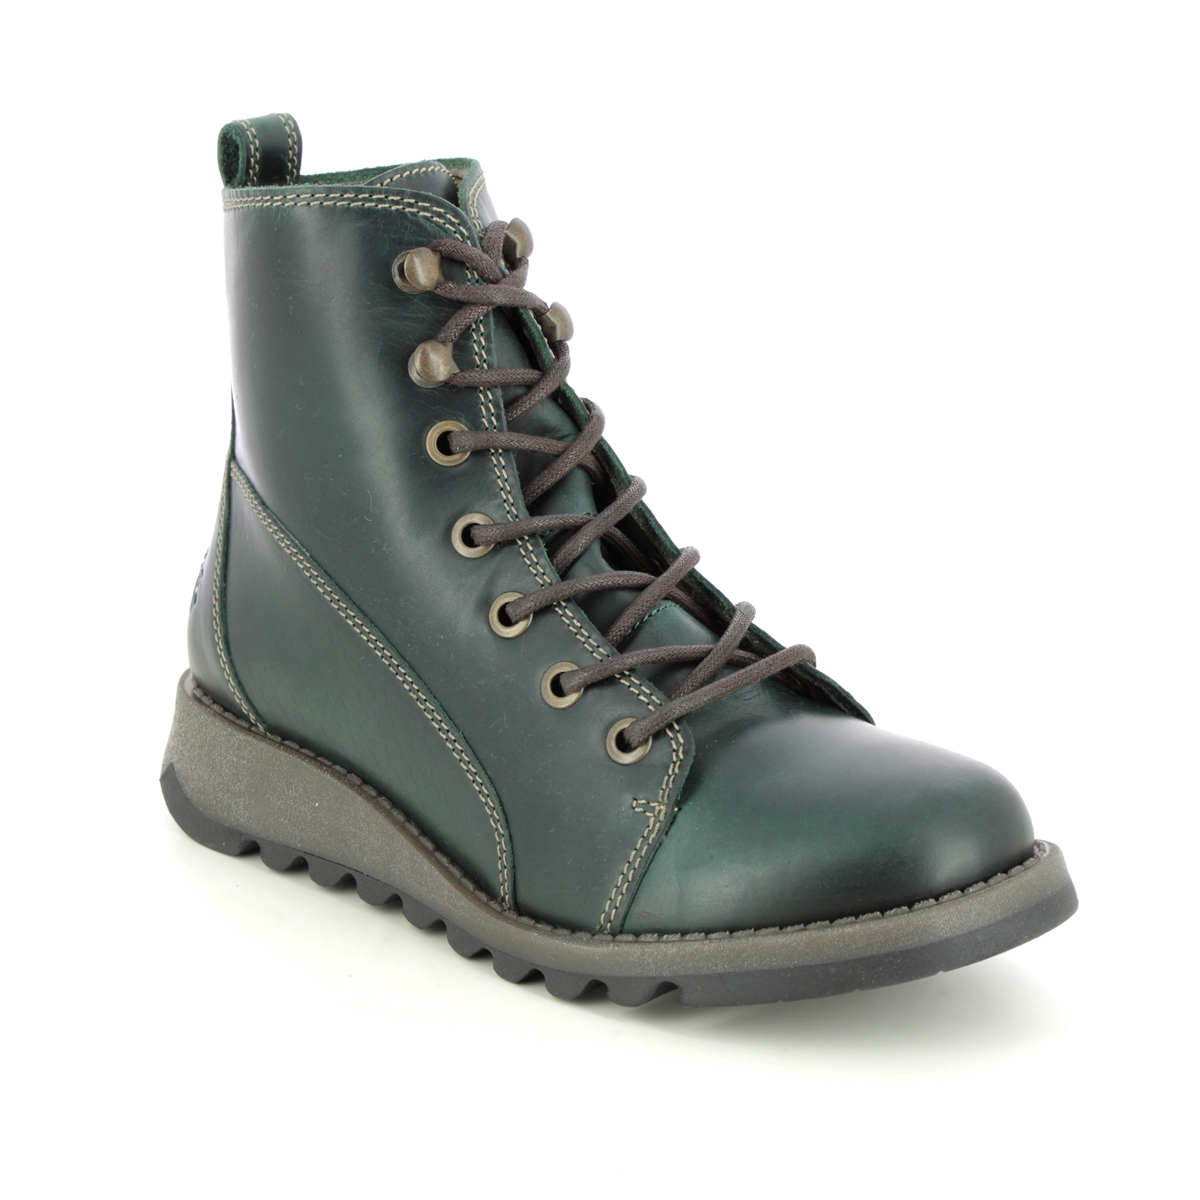 Fly London Sore  Sminx Petrol leather Womens Lace Up Boots P144813-002 in a Plain Leather in Size 37